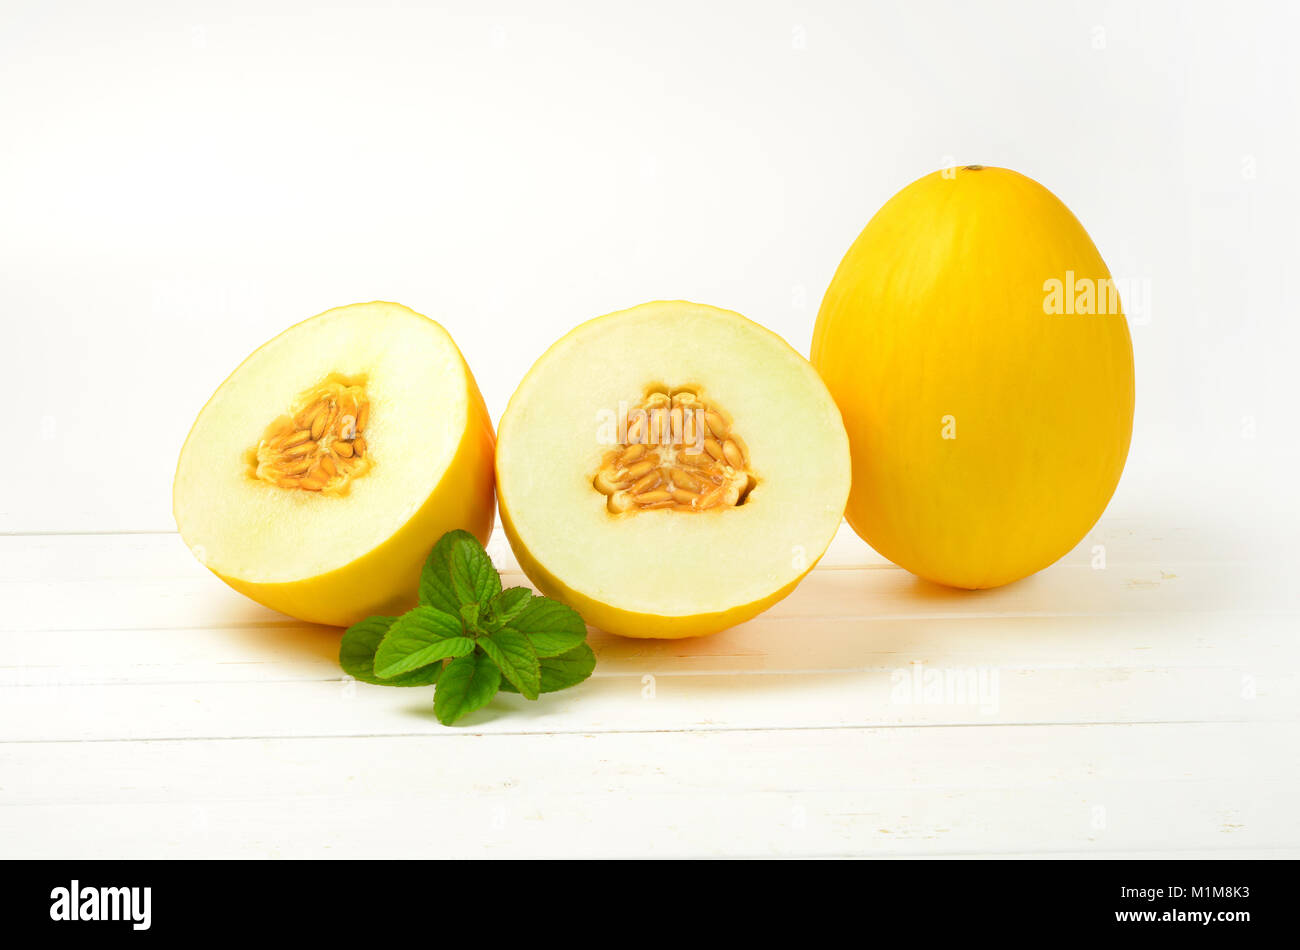 whole and halved yellow melons Stock Photo